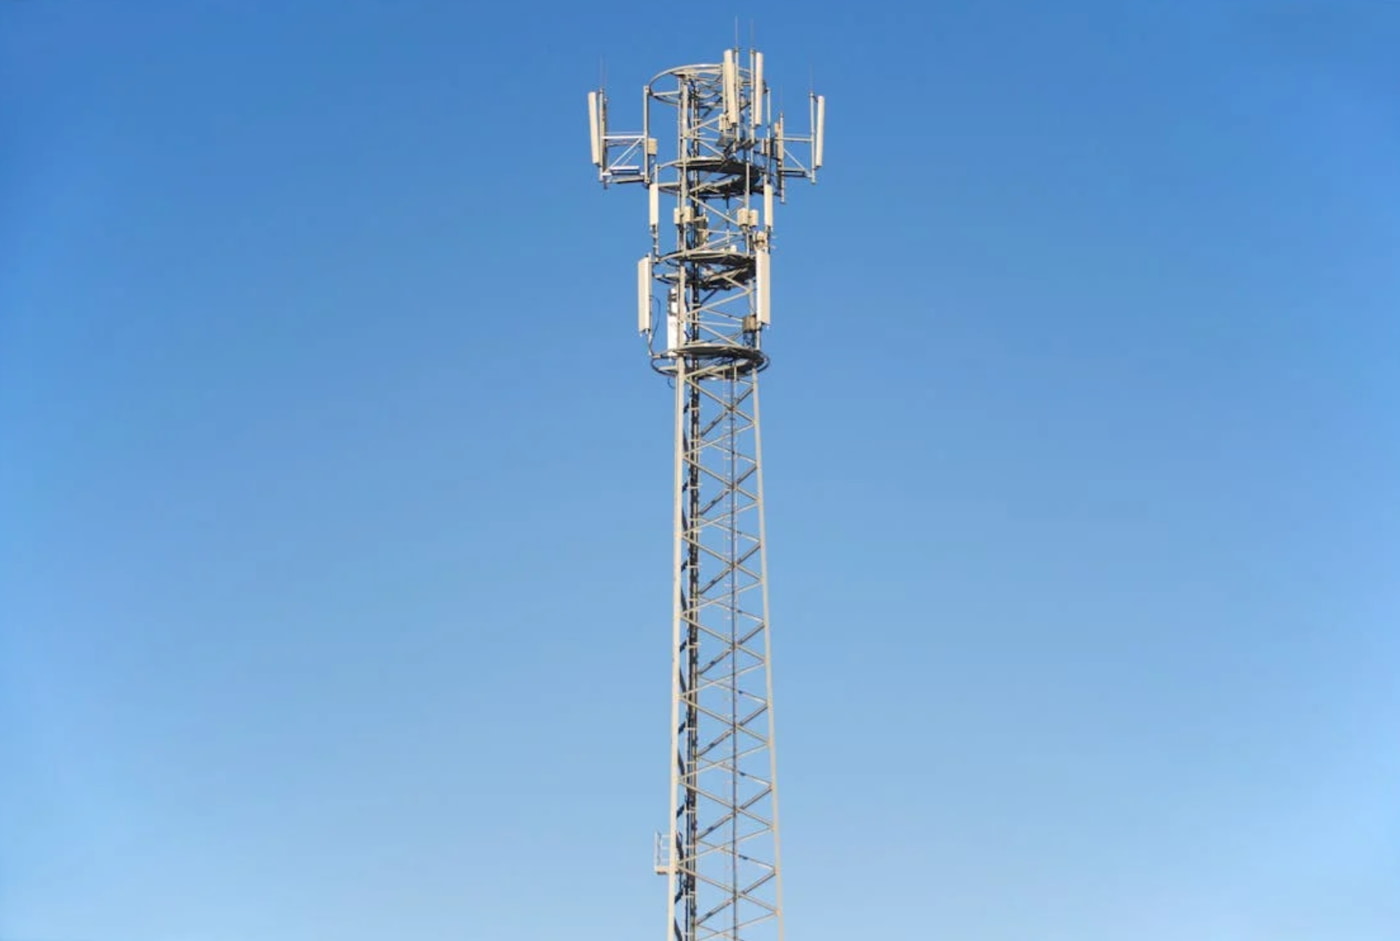 a tower with antennas on it